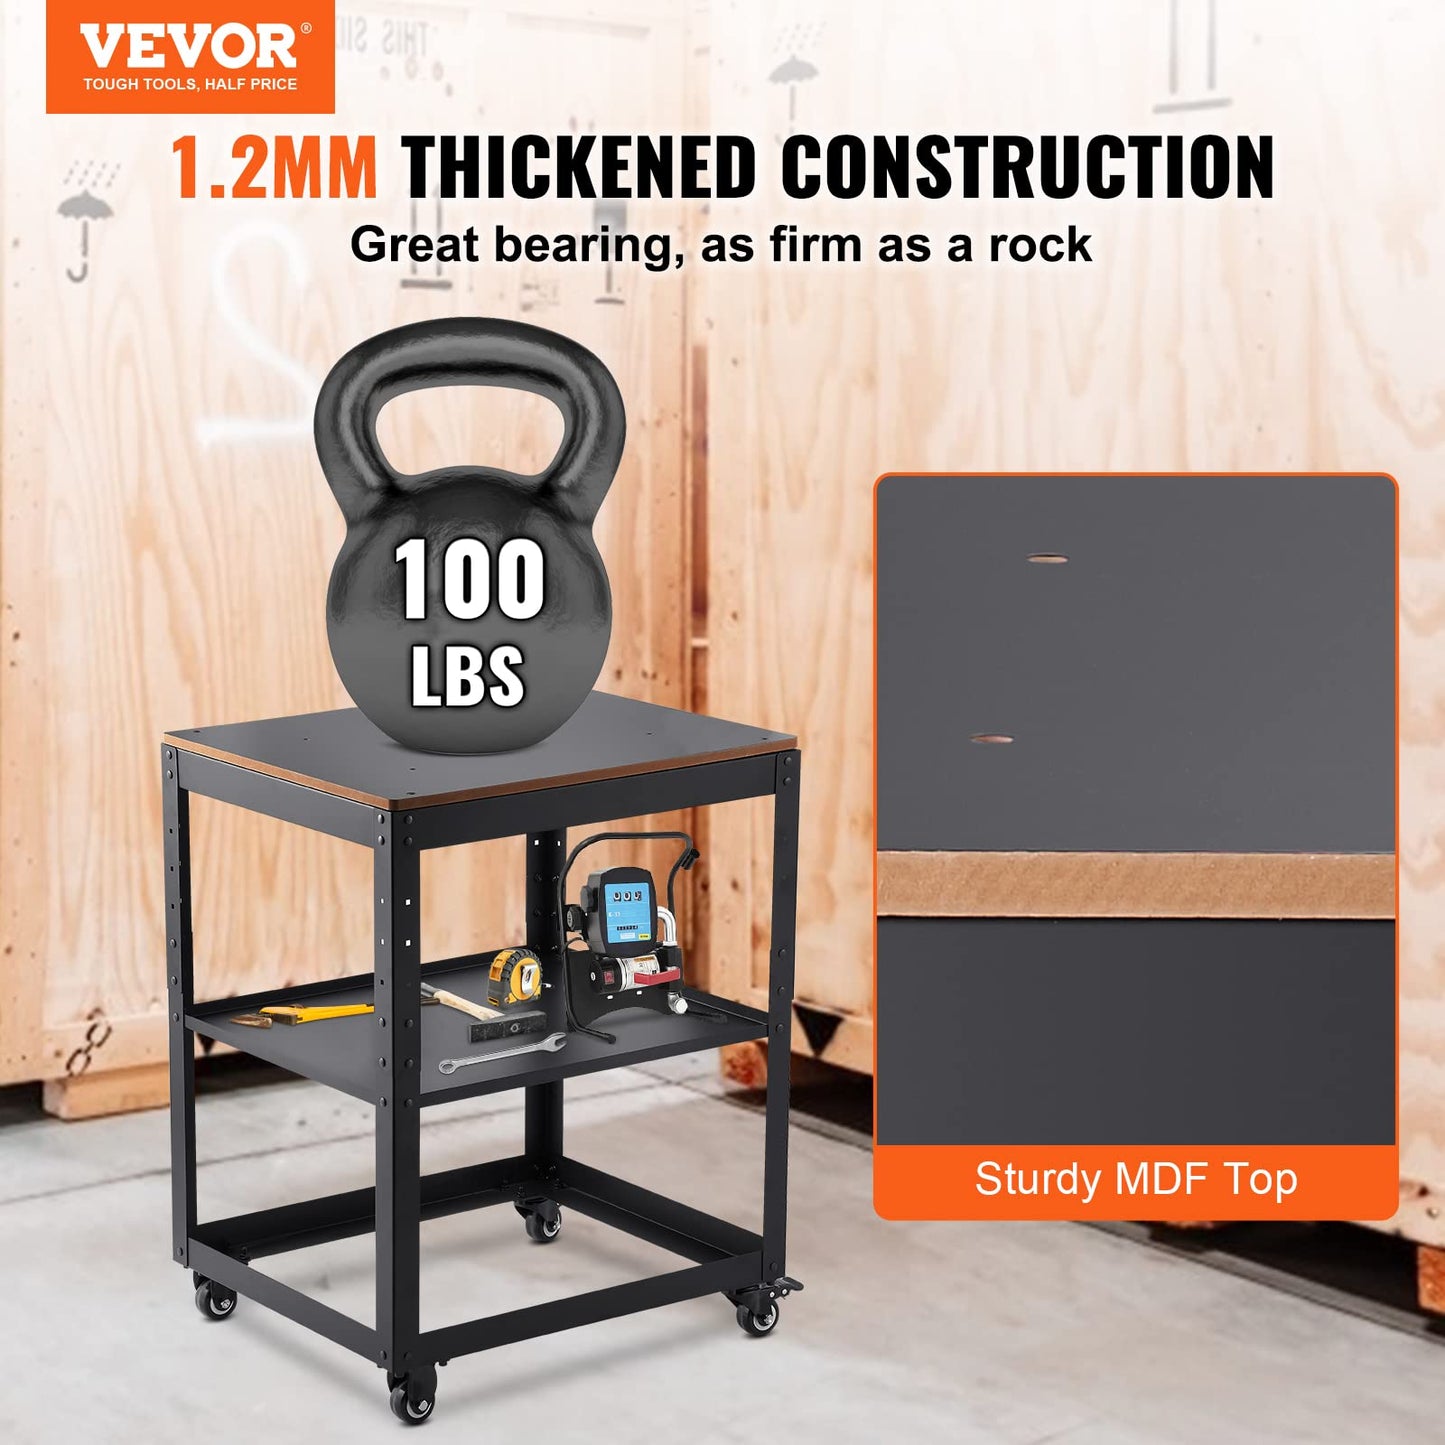 VEVOR Thickness Planer Stand, 100 lbs heavy loads, Three-Gear Height Adjustable Thickness Planer Table,with 4 Stable Casters & Storage Space, for